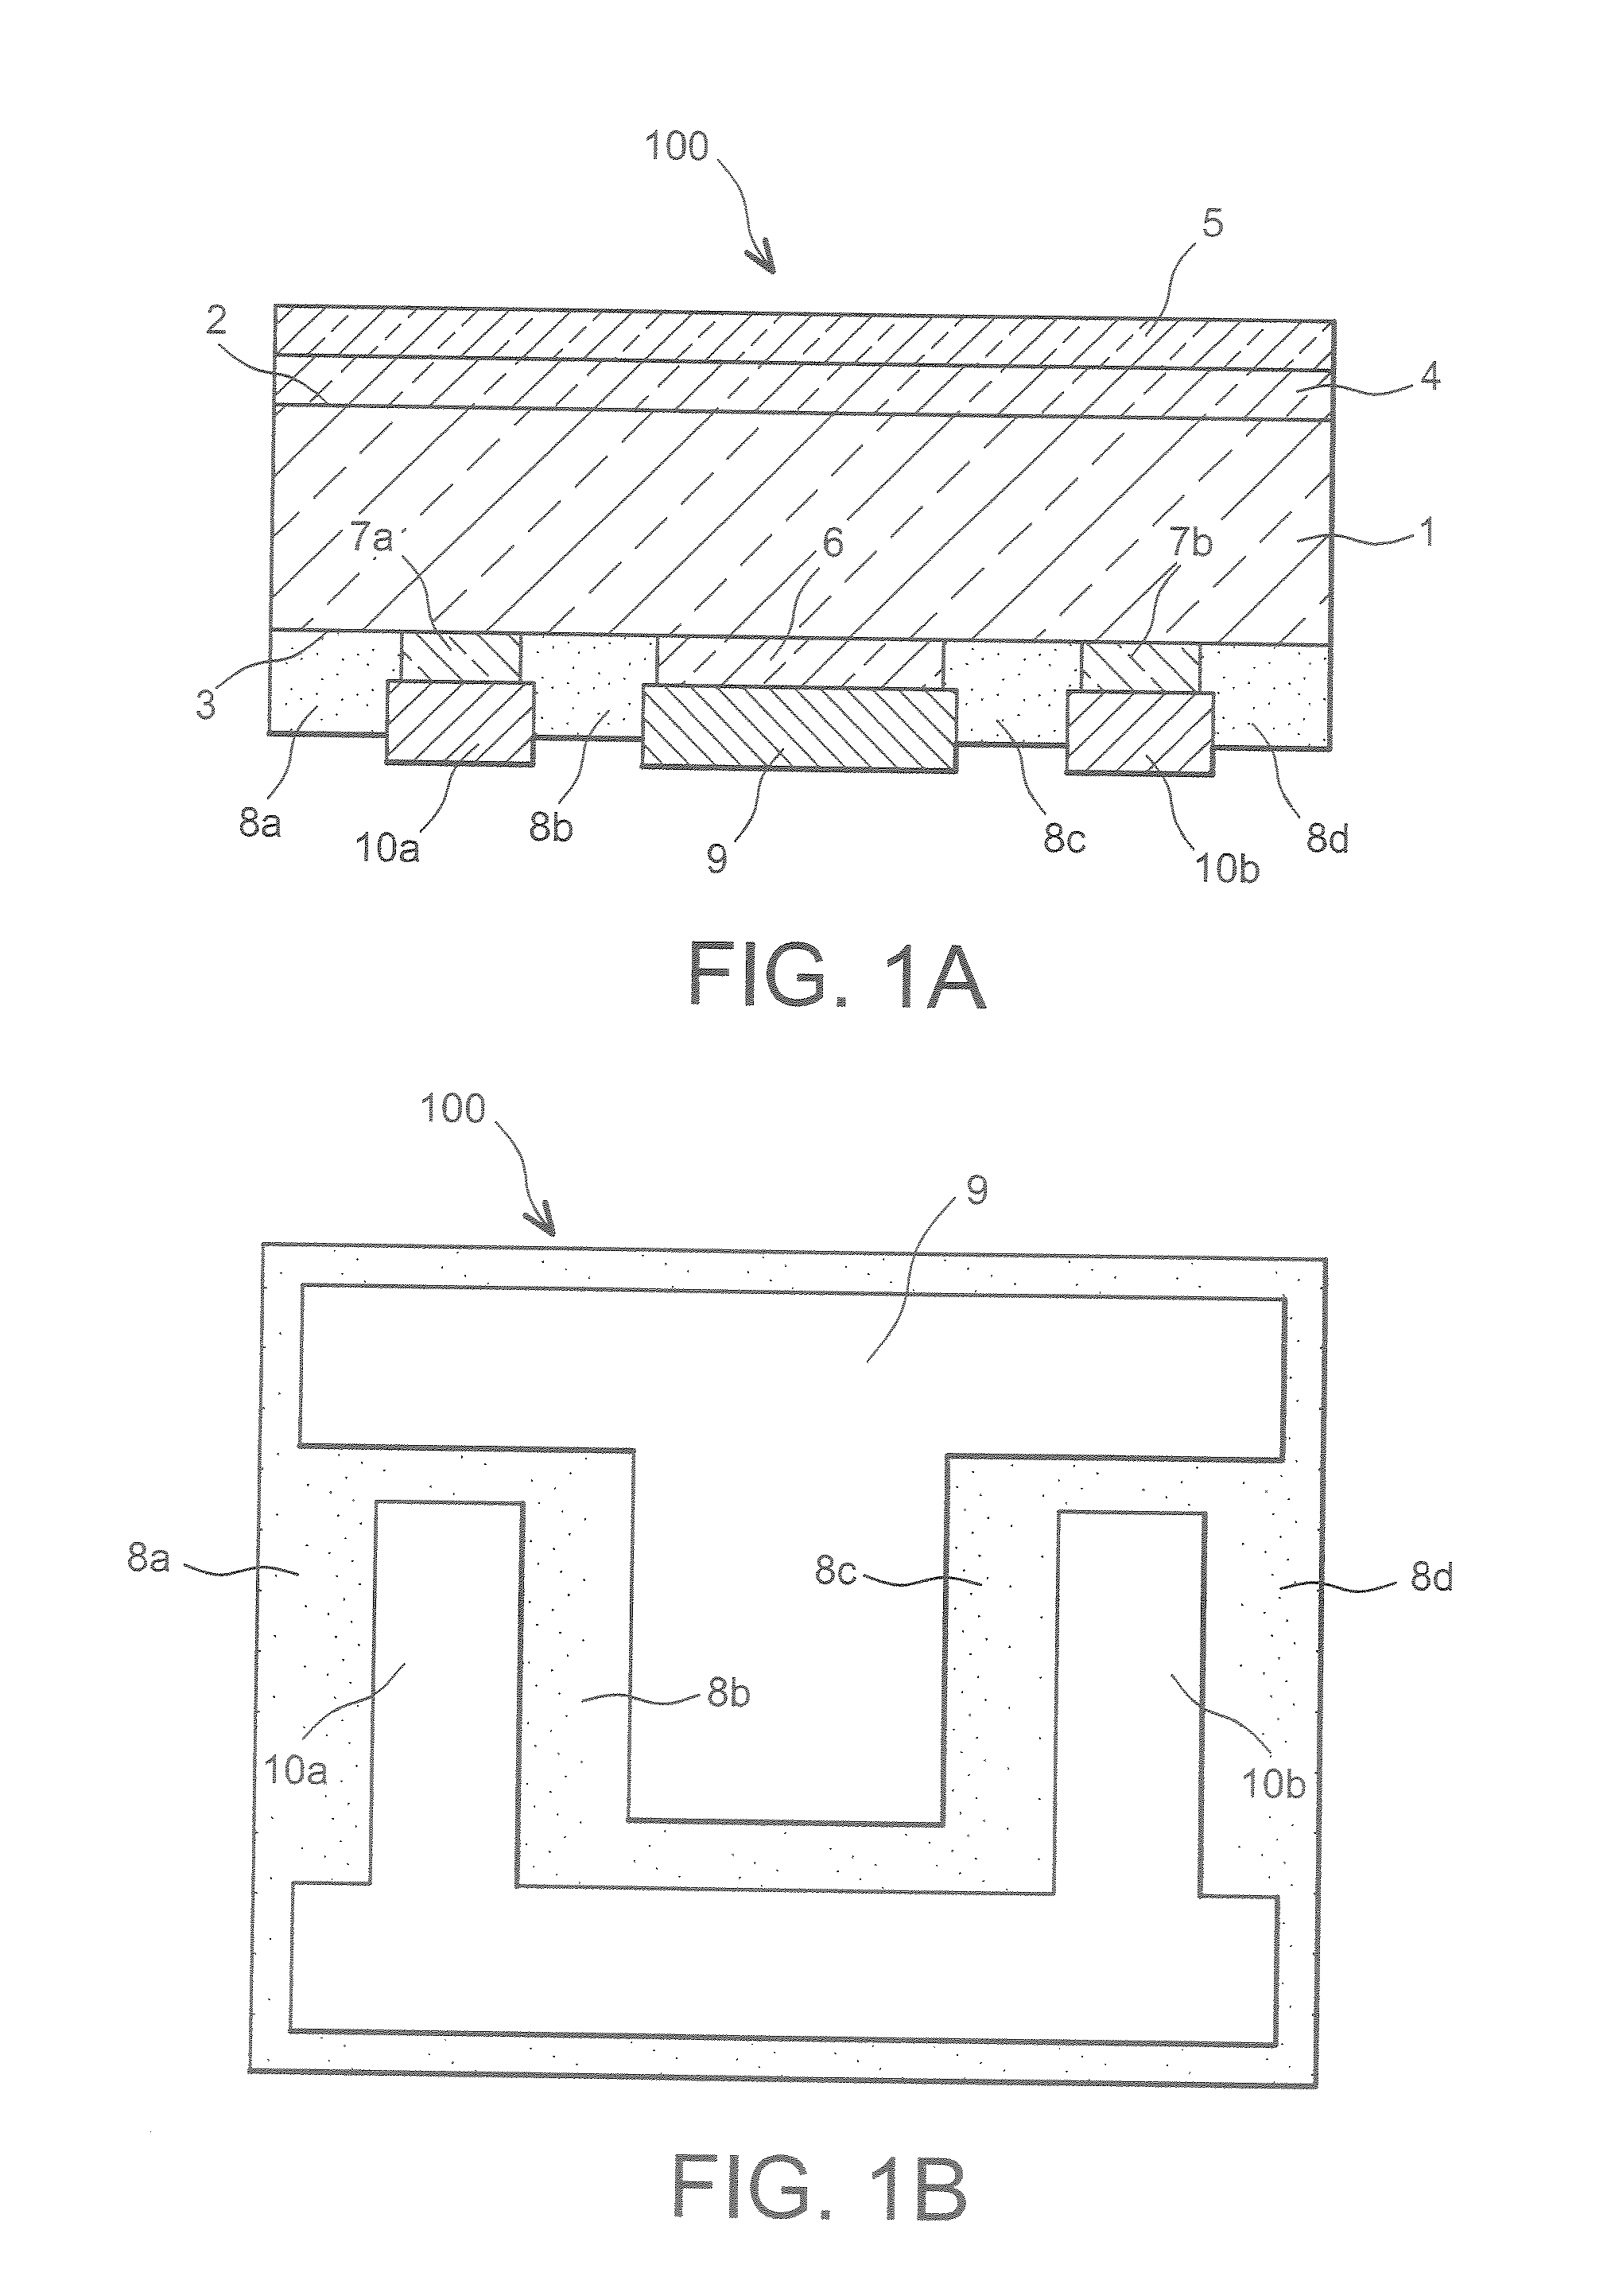 Semiconductor Device with Heterojunctions and an Inter-Finger Structure